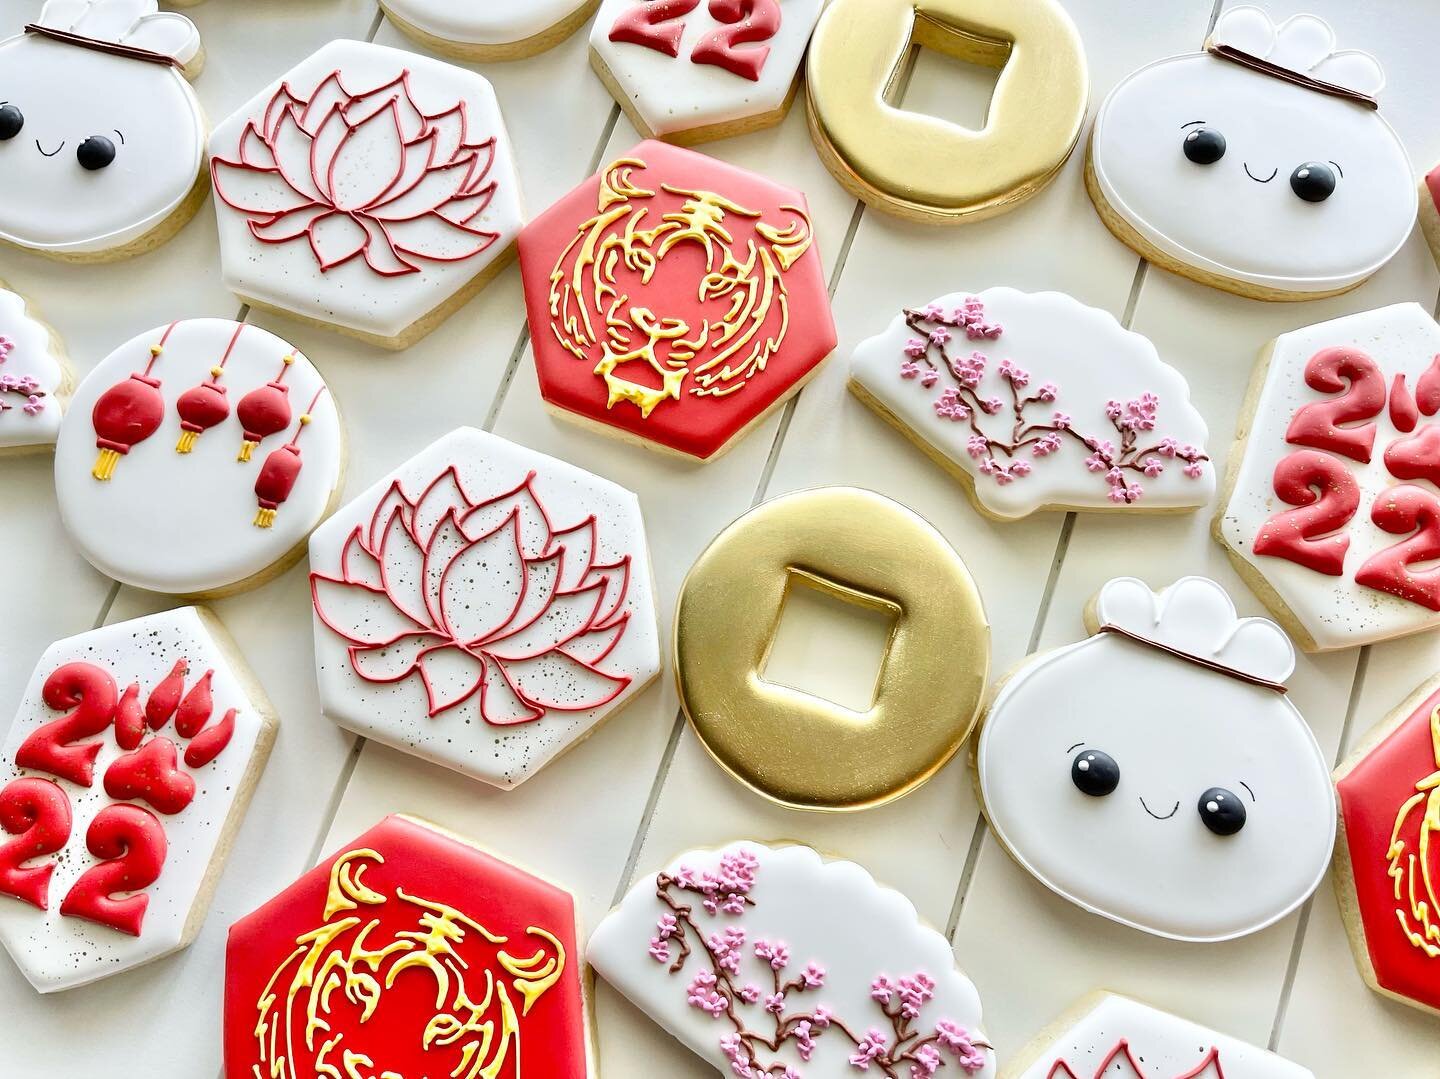 Happy Lunar New year🧧Year of the tiger 🐅 
.
.
.
#lunarnewyear #yearofthetiger #lunarnewyearcookies #sugarcookies #tampa #tampacookies #tampasugarcookies #tampabaker #tampabakery